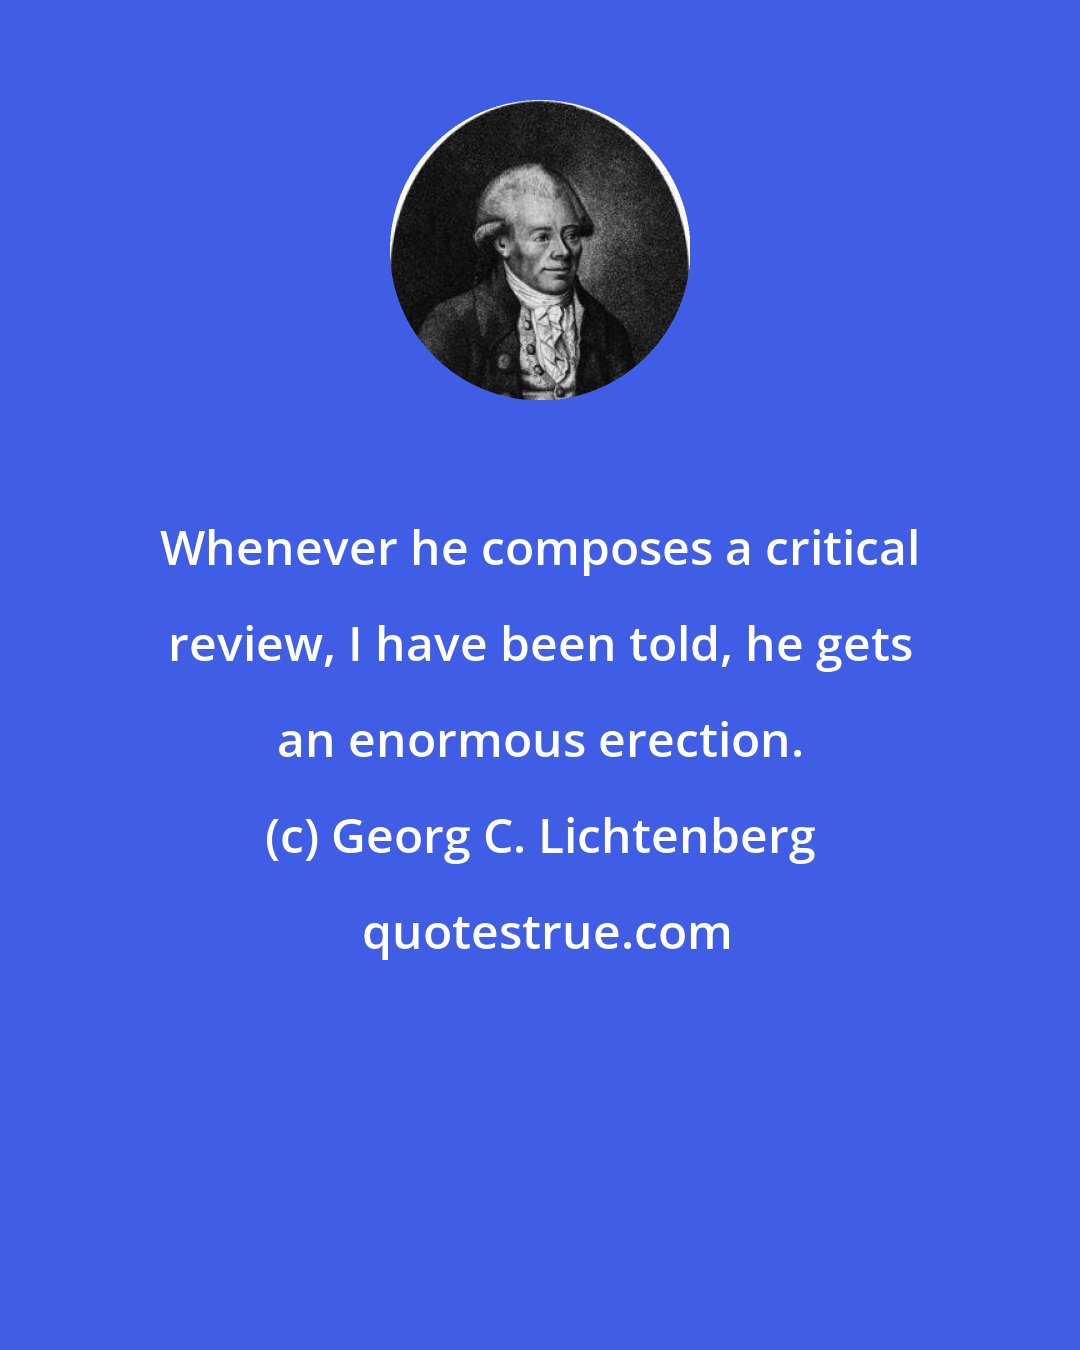 Georg C. Lichtenberg: Whenever he composes a critical review, I have been told, he gets an enormous erection.